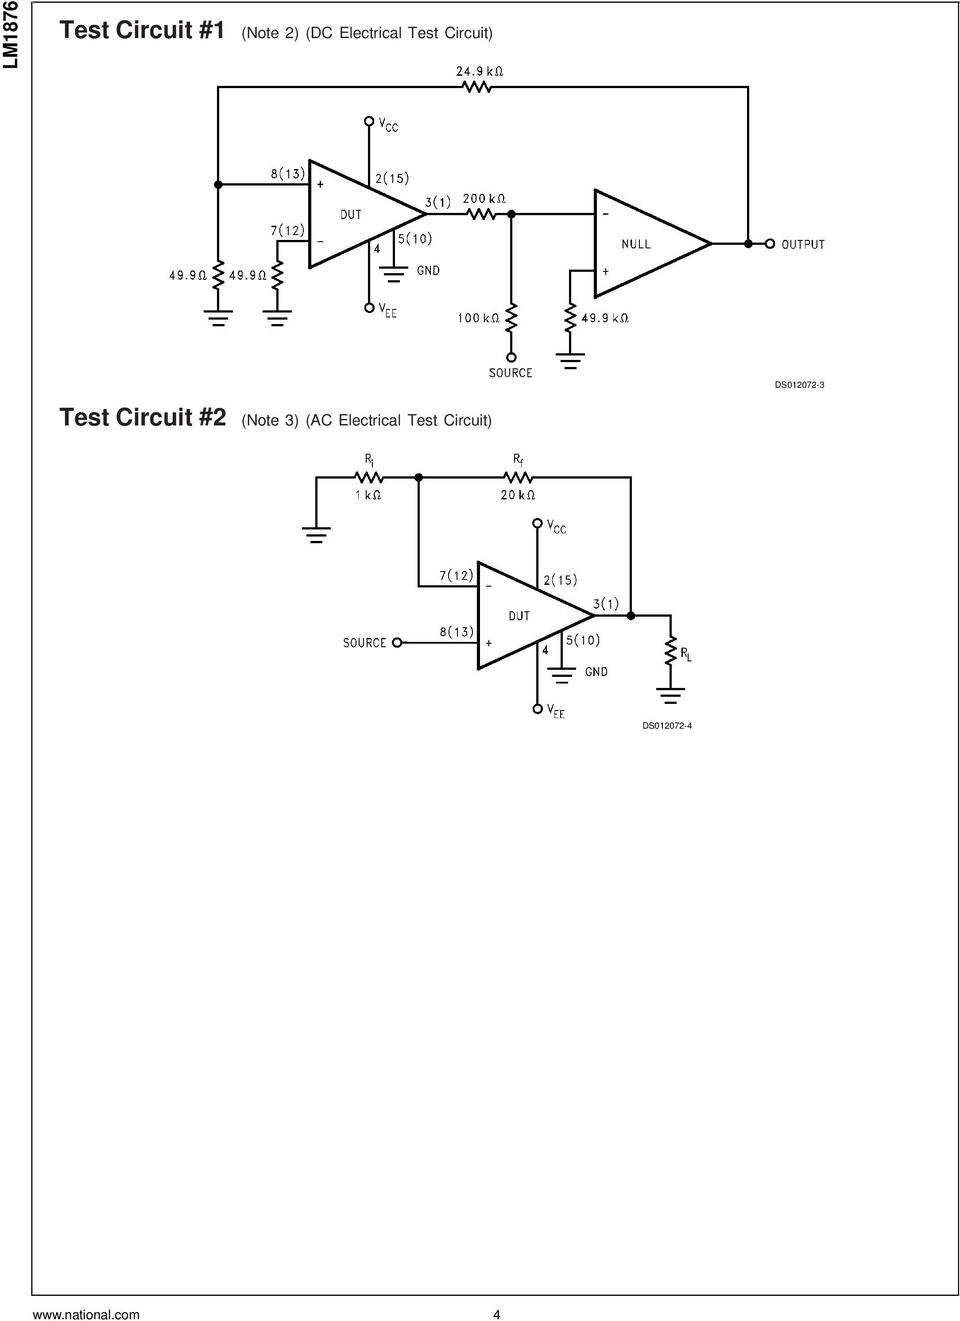 Test Circuit #2 (Note 3) (AC